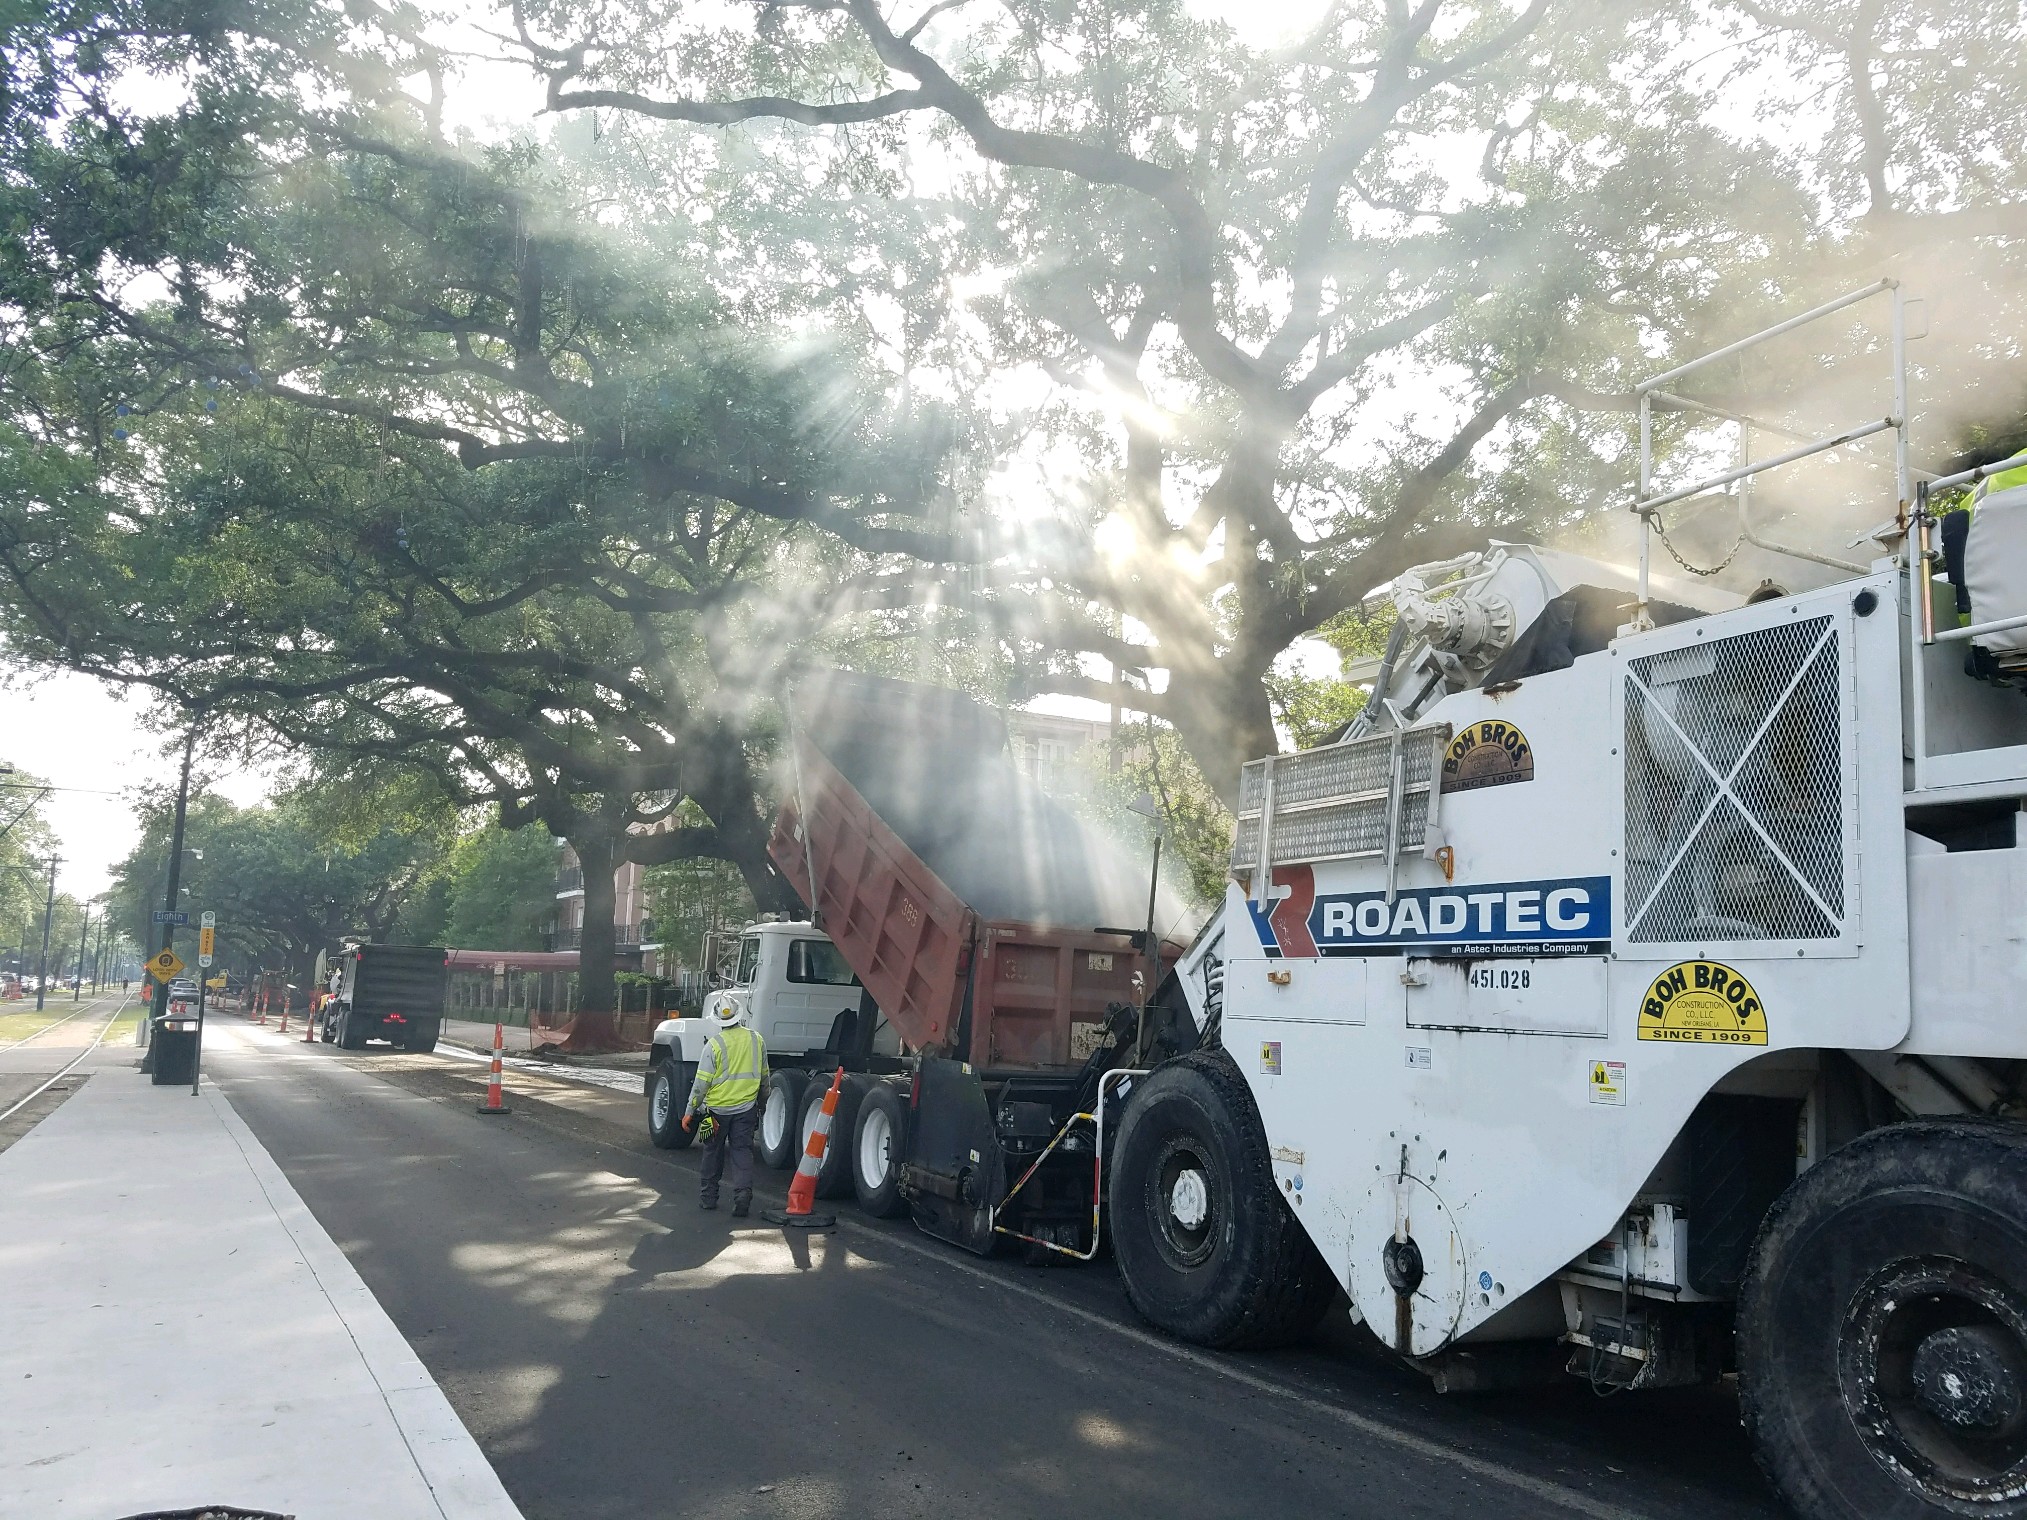 Large Portion of Repaving Finished on St. Charles Ave. Project